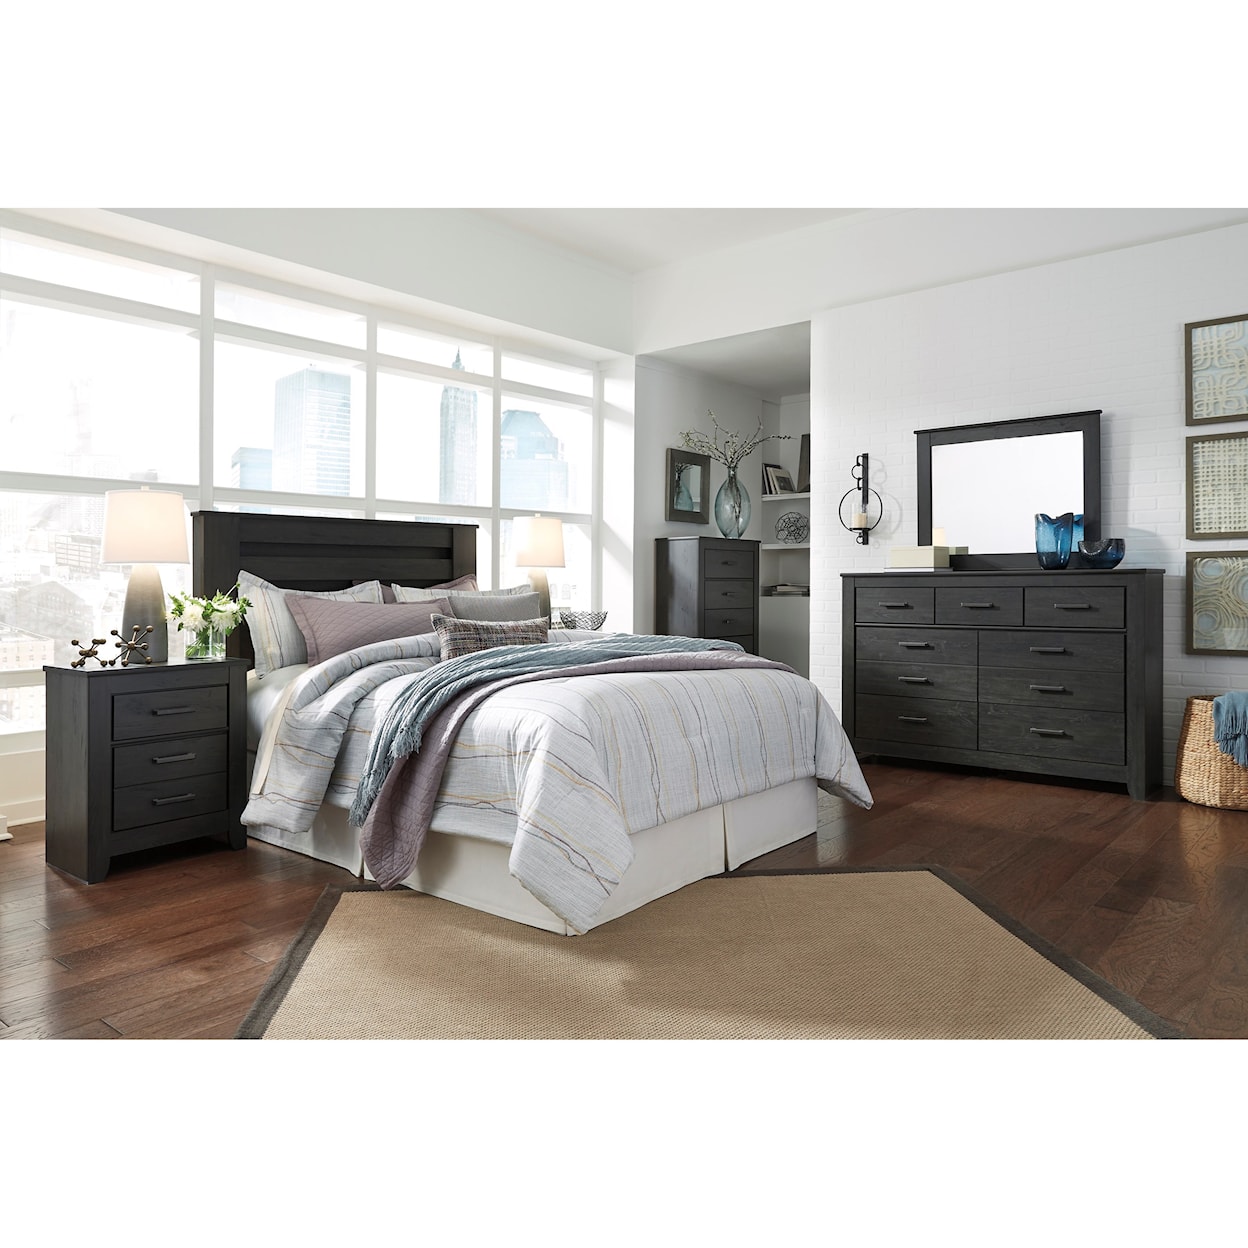 Signature Design by Ashley Furniture Brinxton Queen/Full Bedroom Group